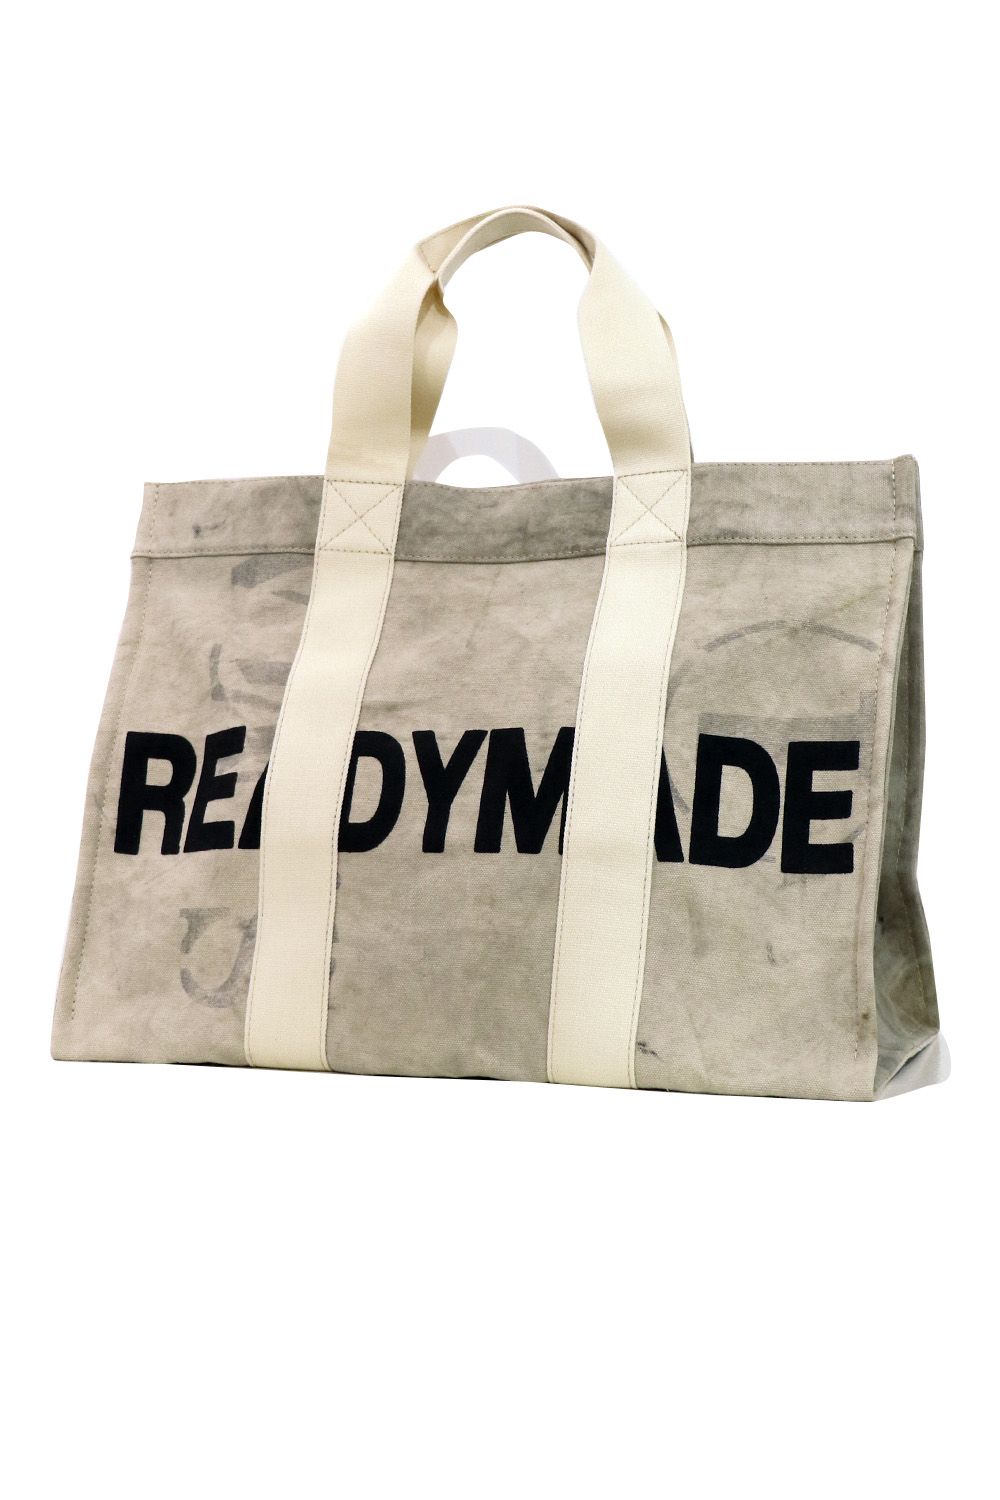 READYMADE EASY TOTE BAG レディメイド バッグ S 白